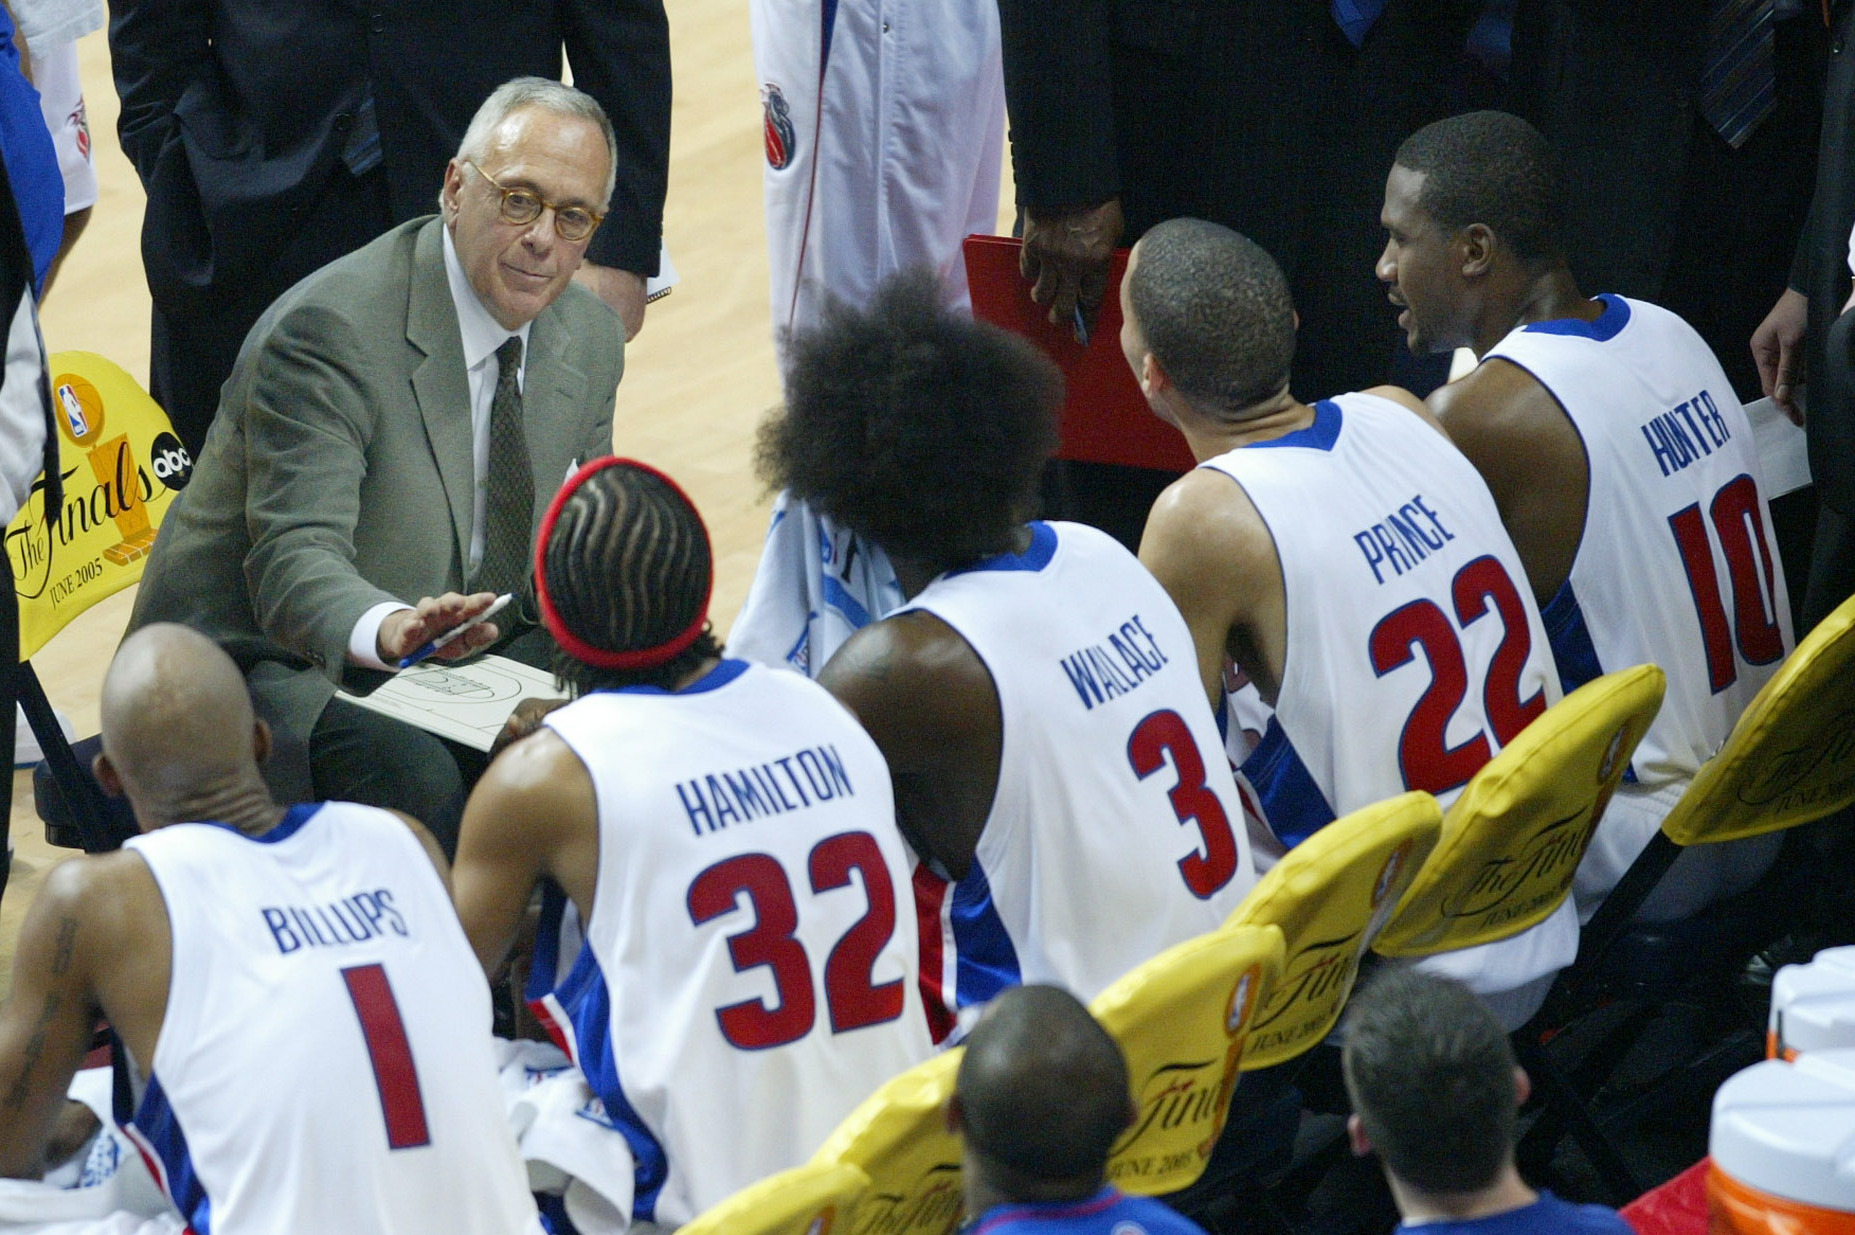 Detroit Pistons Built Their 2004 Championship Team In Two Years